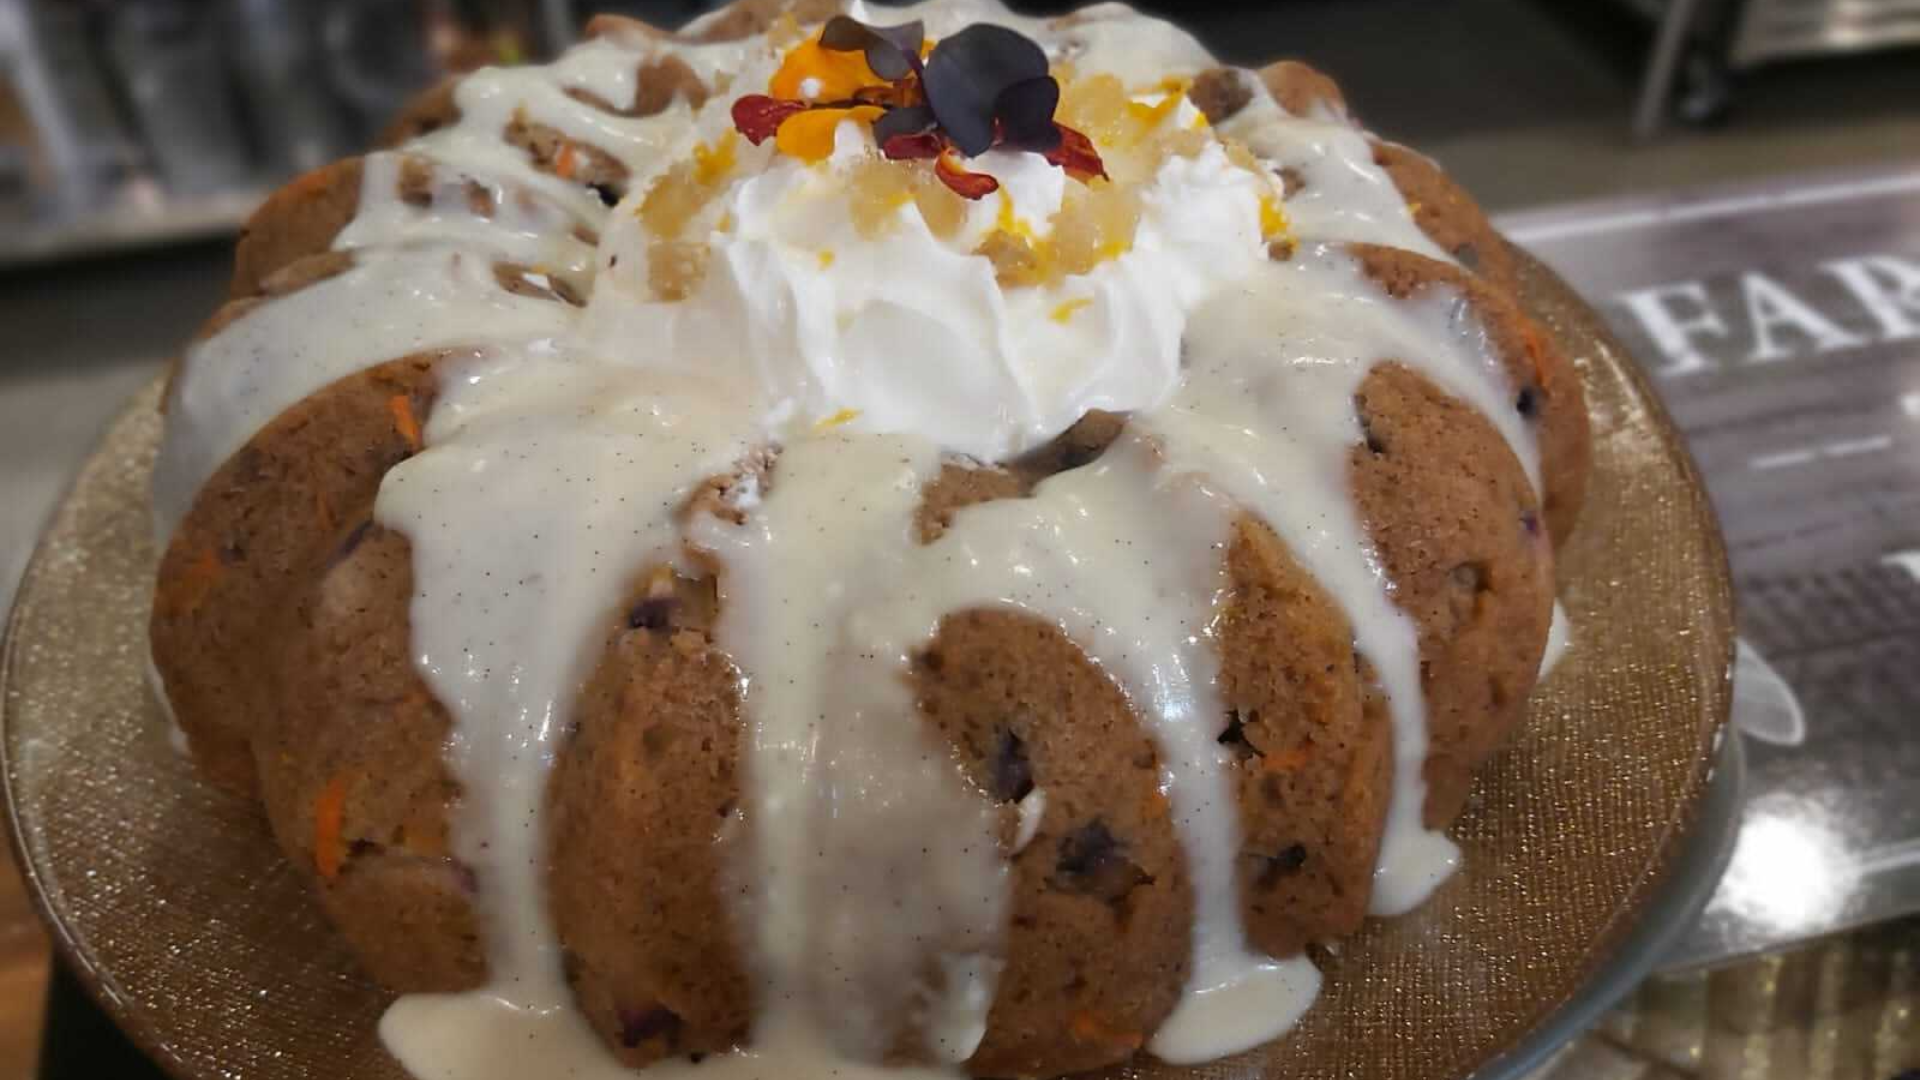 Steamed plum pudding with vanilla bean rum sauce